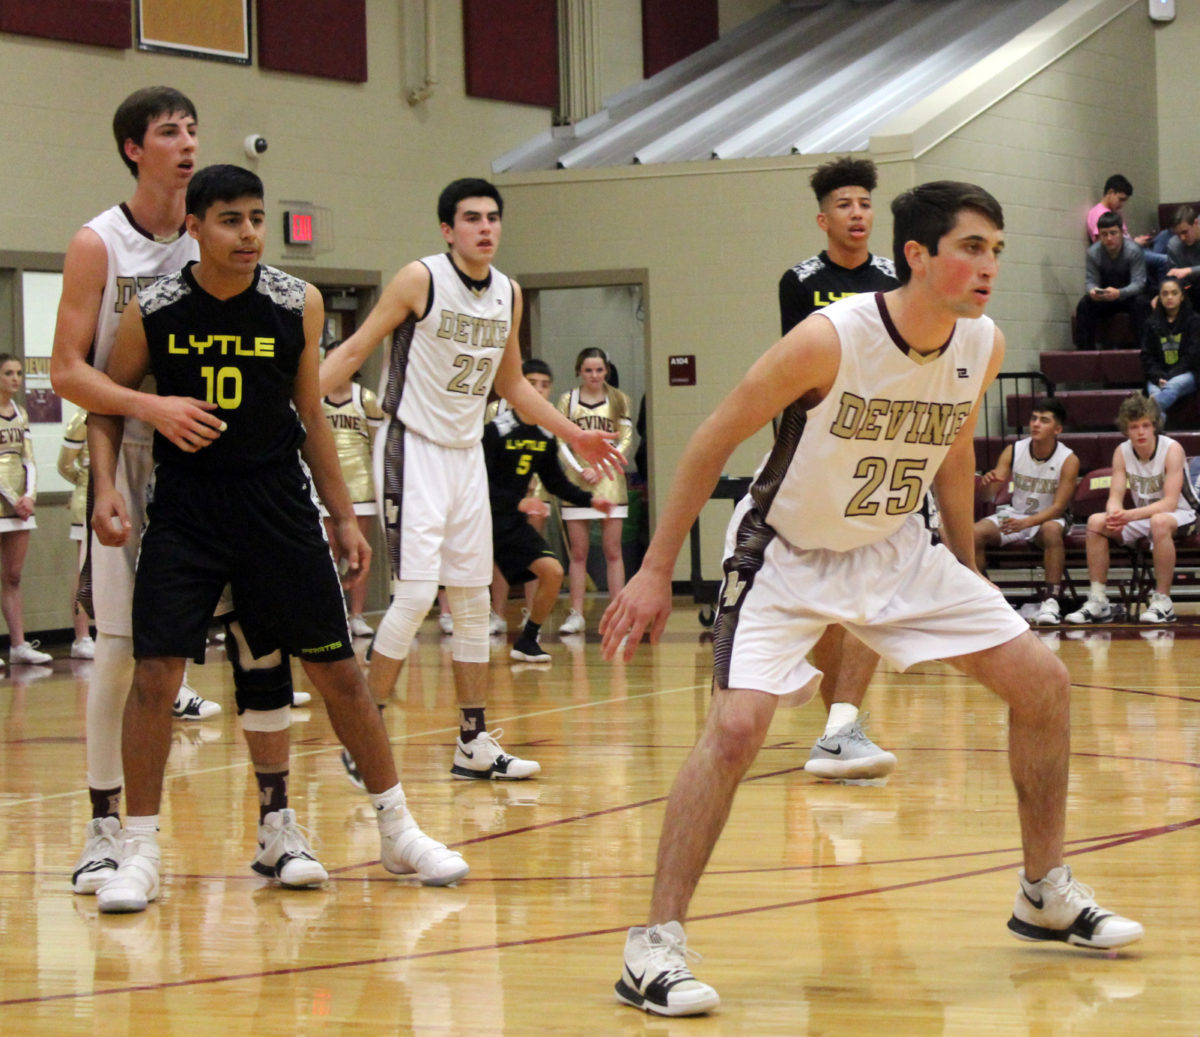 Varsity Warhorses open District with win over Lytle